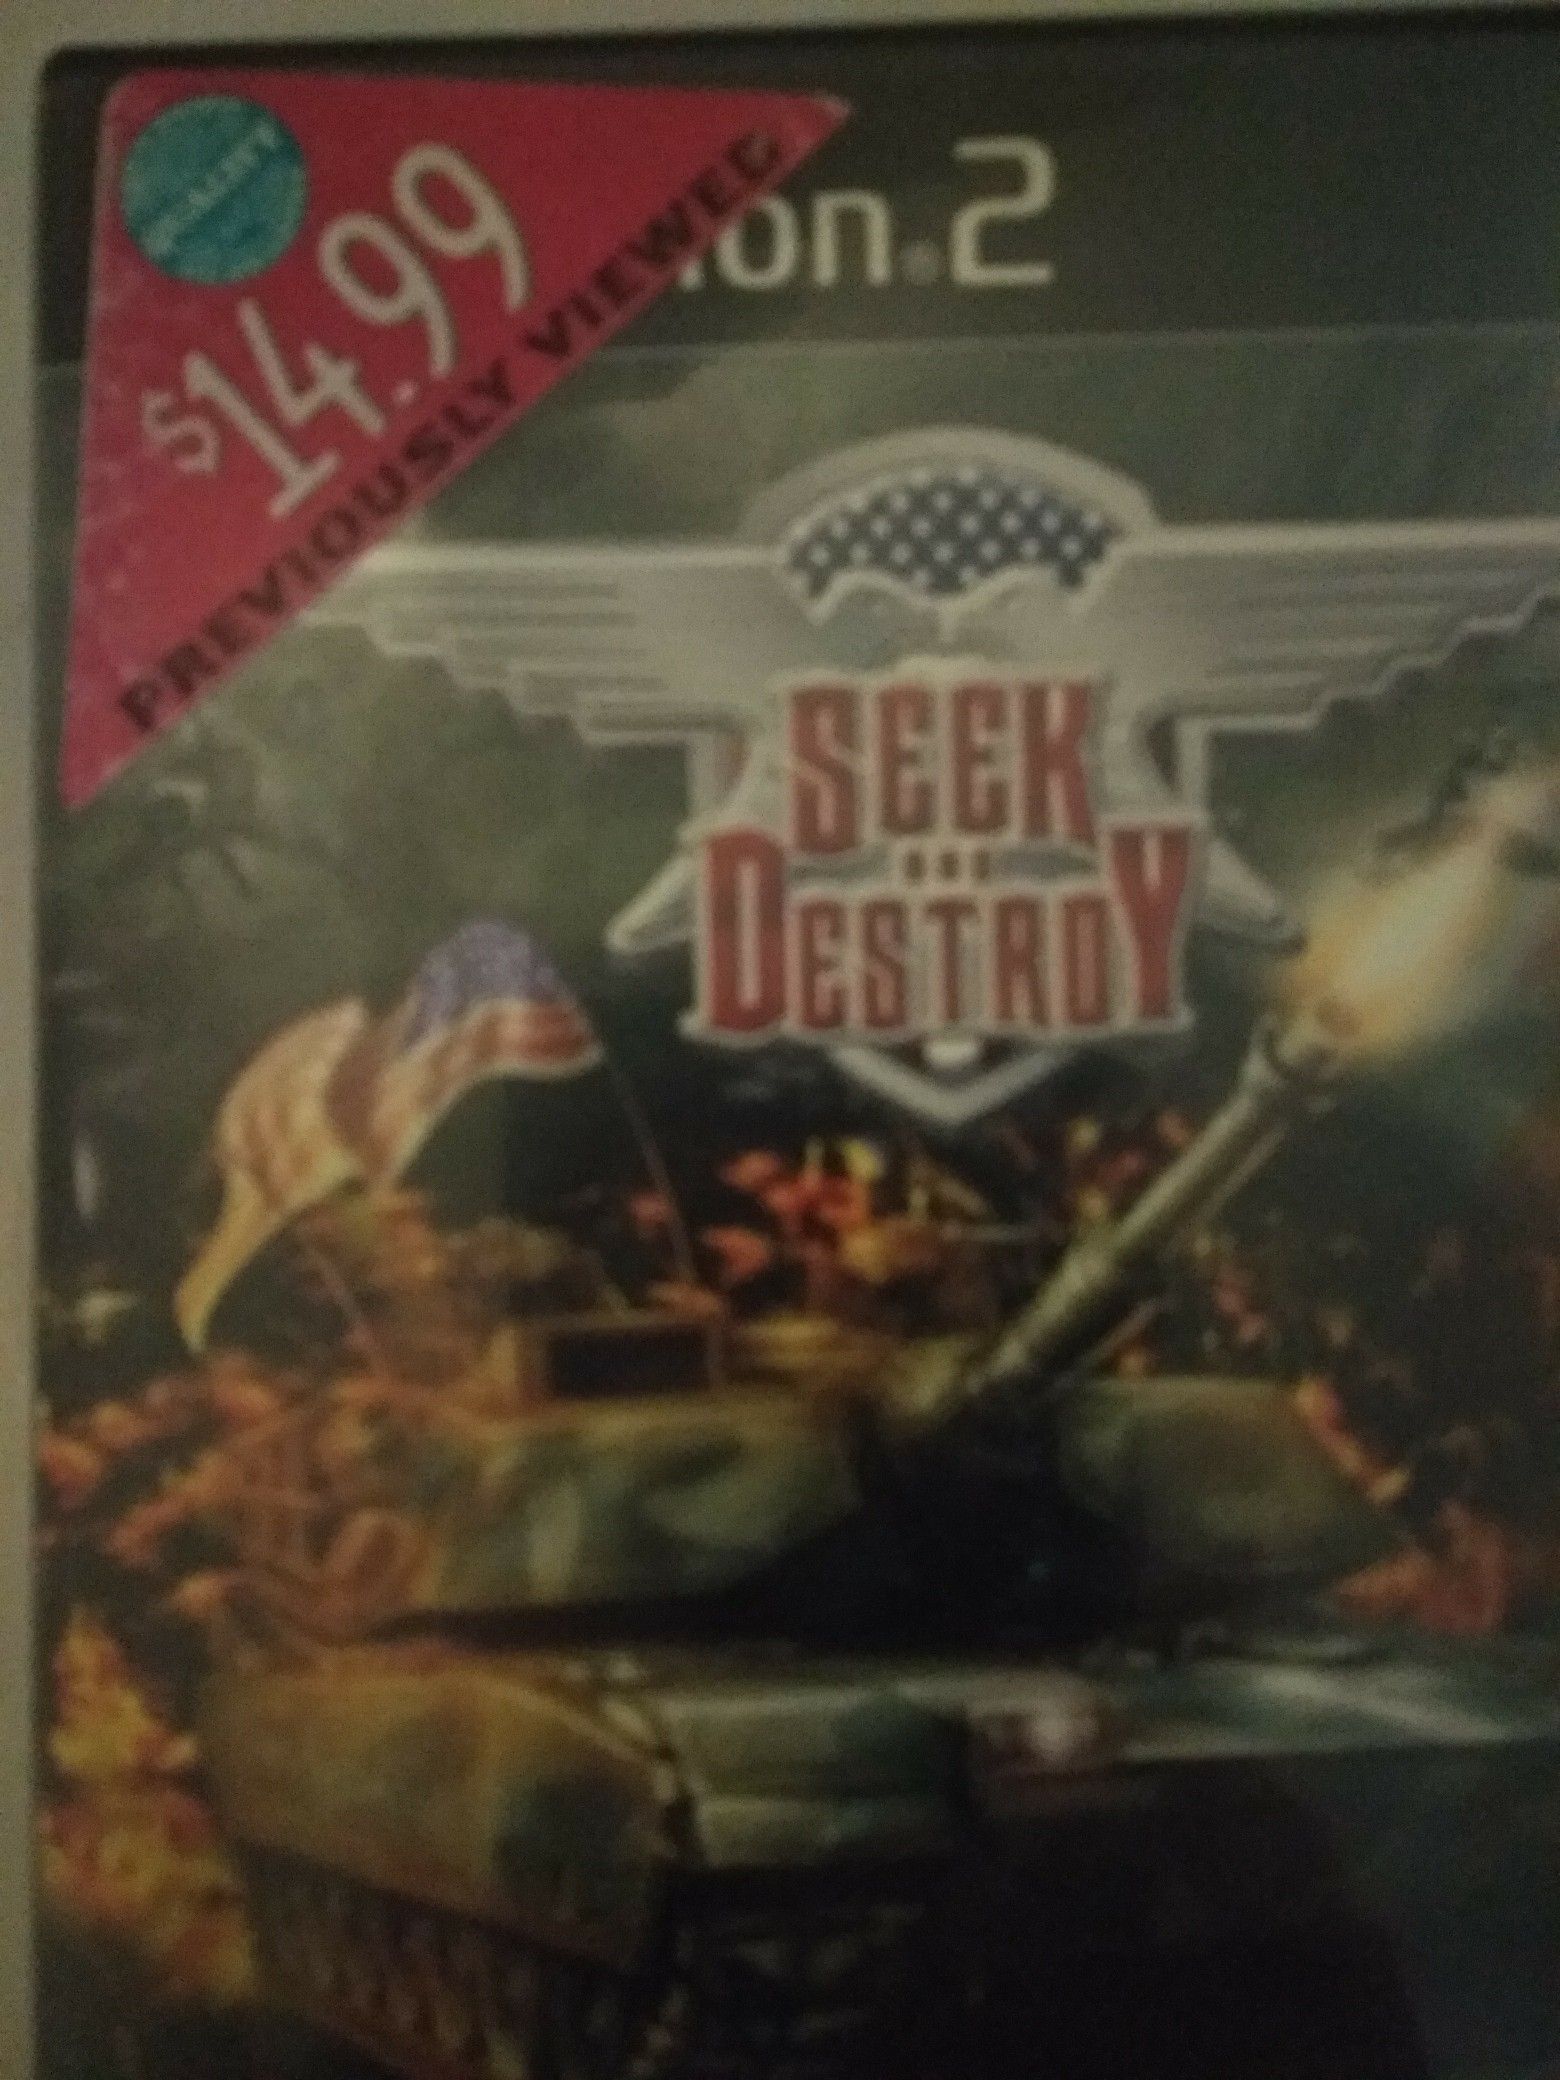 SEEK AND DESTROY PS2 COMPLETE